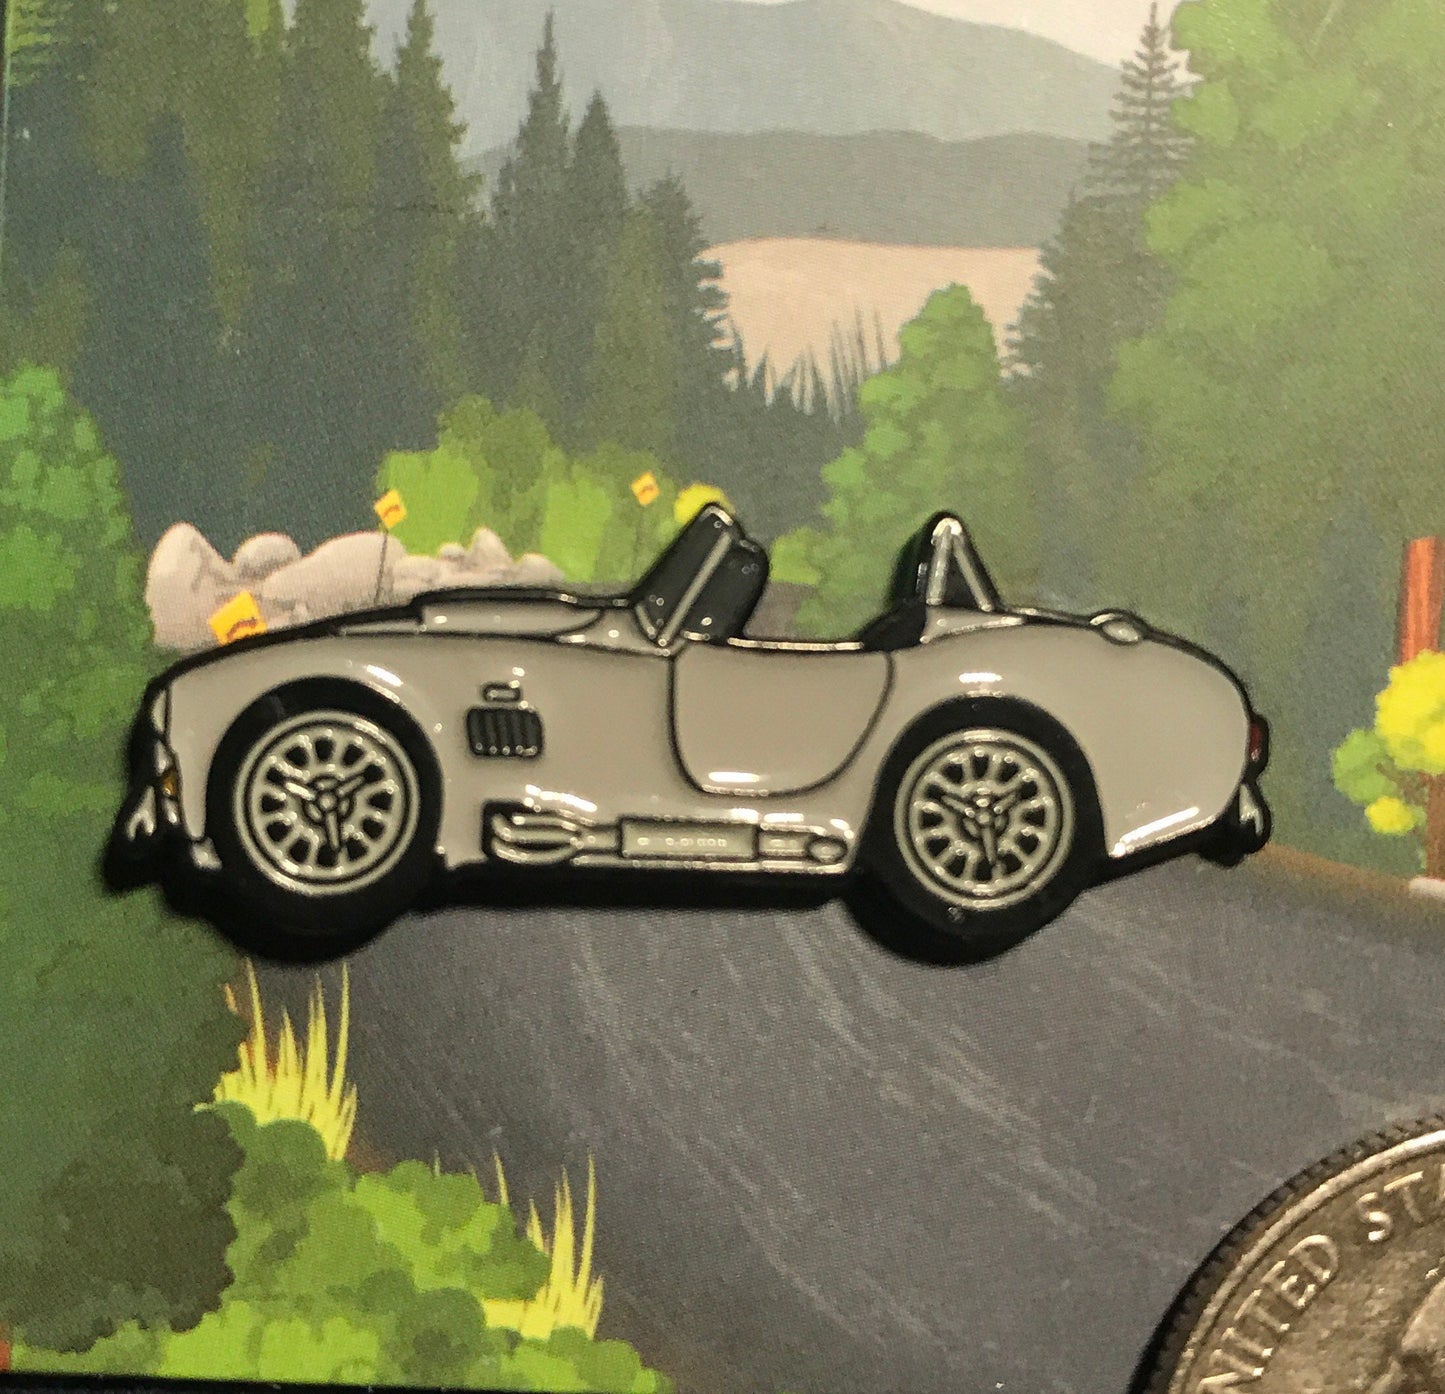 AC Shelby Cobra Enamel Auto Lapel Pin Badge available in 5 colors SILVER